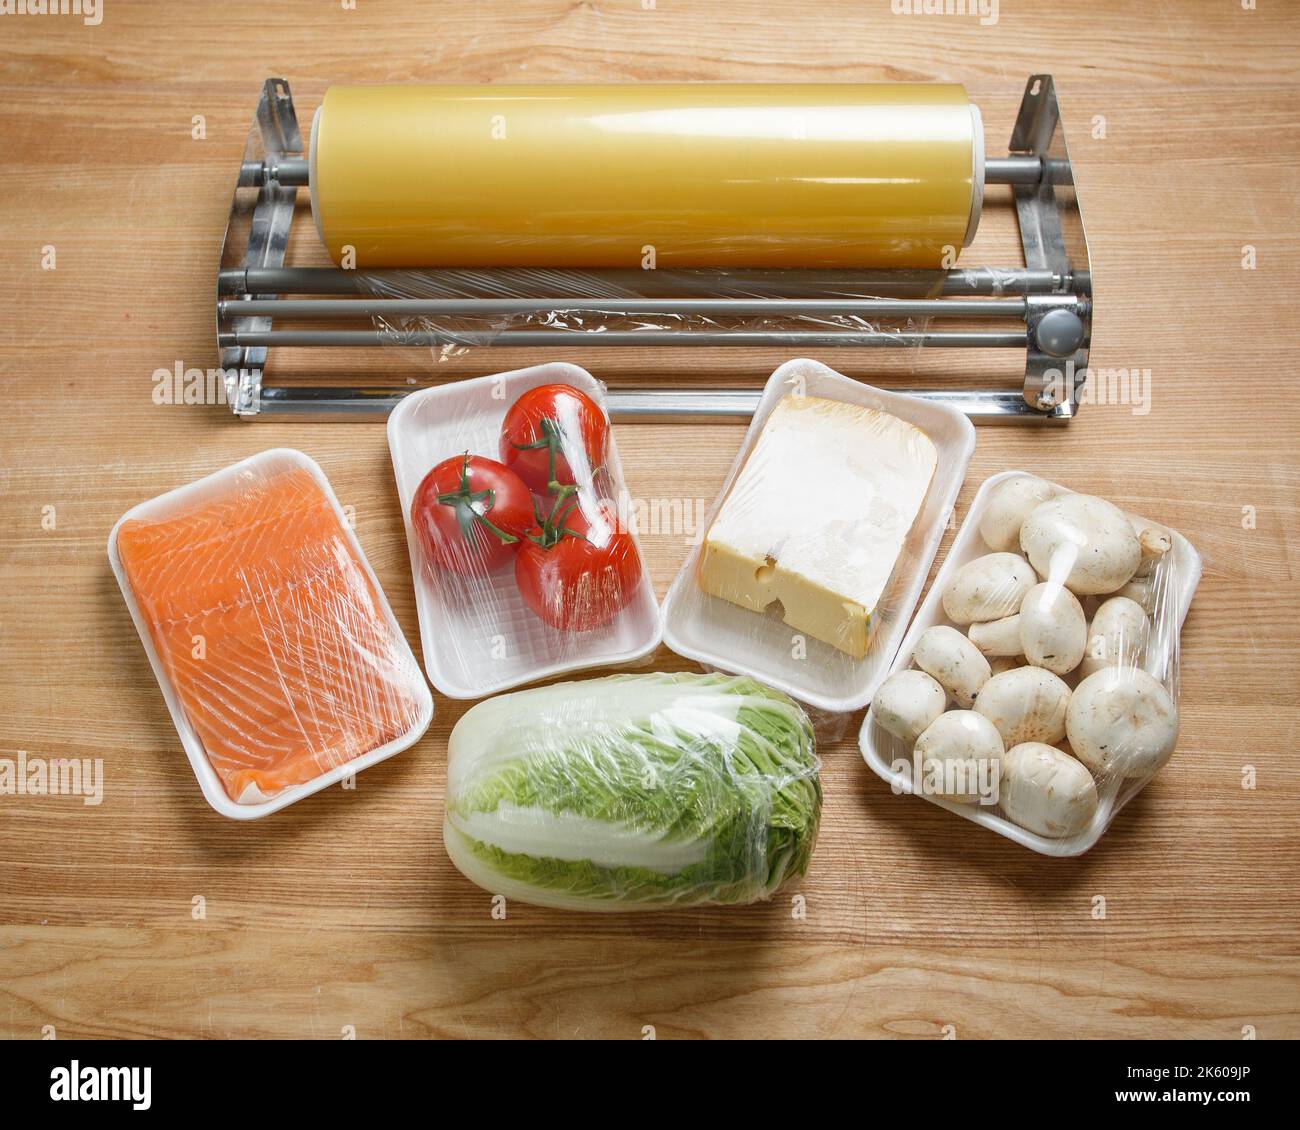 https://c8.alamy.com/comp/2K609JP/tomatoes-mushrooms-cheese-salmon-fillets-and-chinese-cabbage-are-wrapped-in-cling-film-for-better-storage-roll-of-transparent-food-film-for-packin-2K609JP.jpg